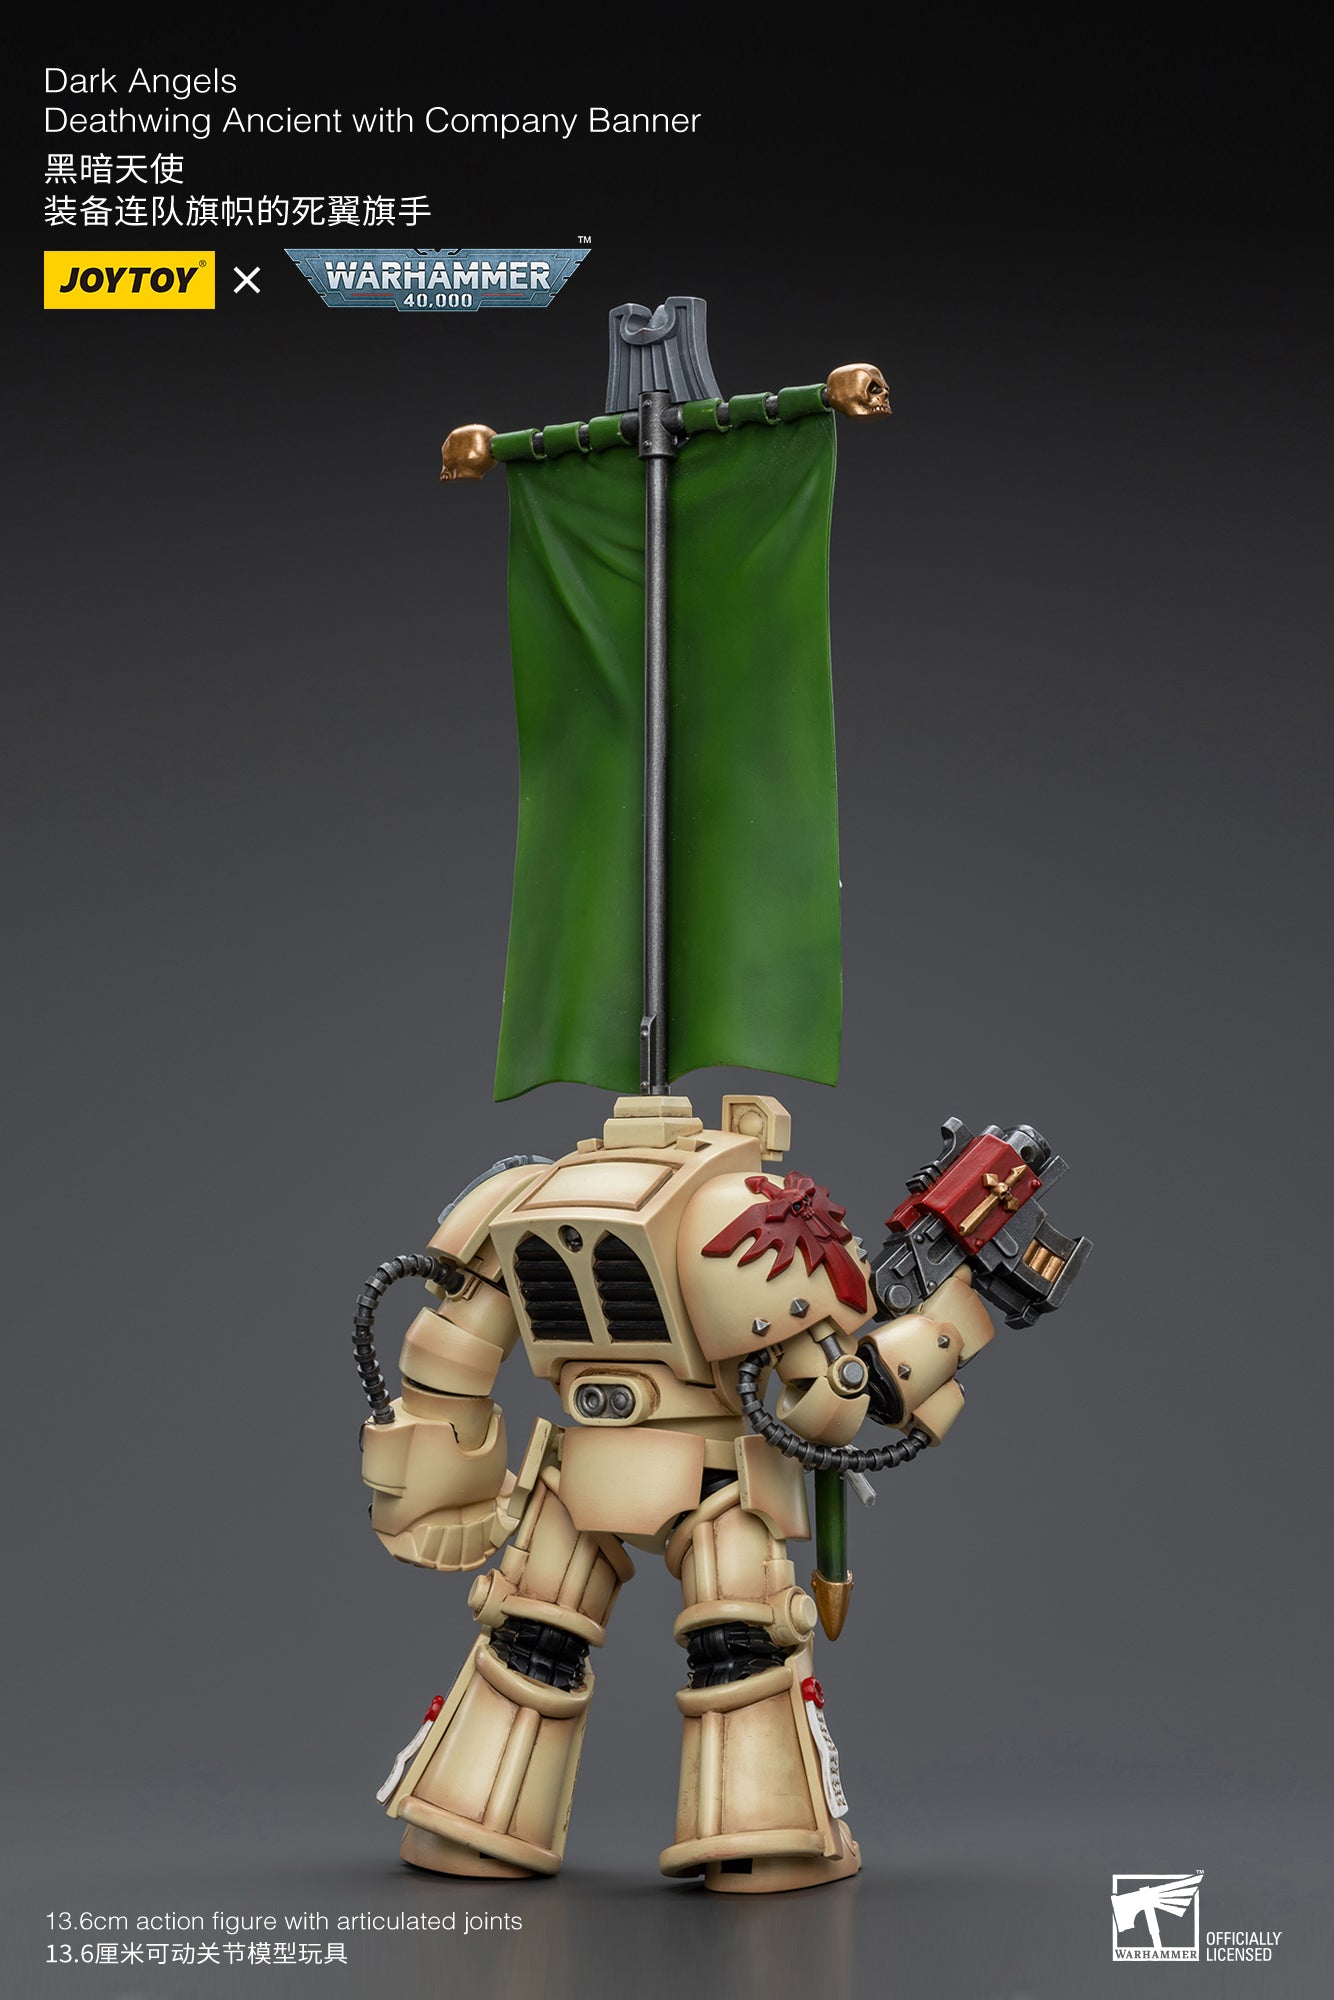 Dark Angels Deathwing Ancient with Company Banner - Warhammer 40K Action Figure By JOYTOY